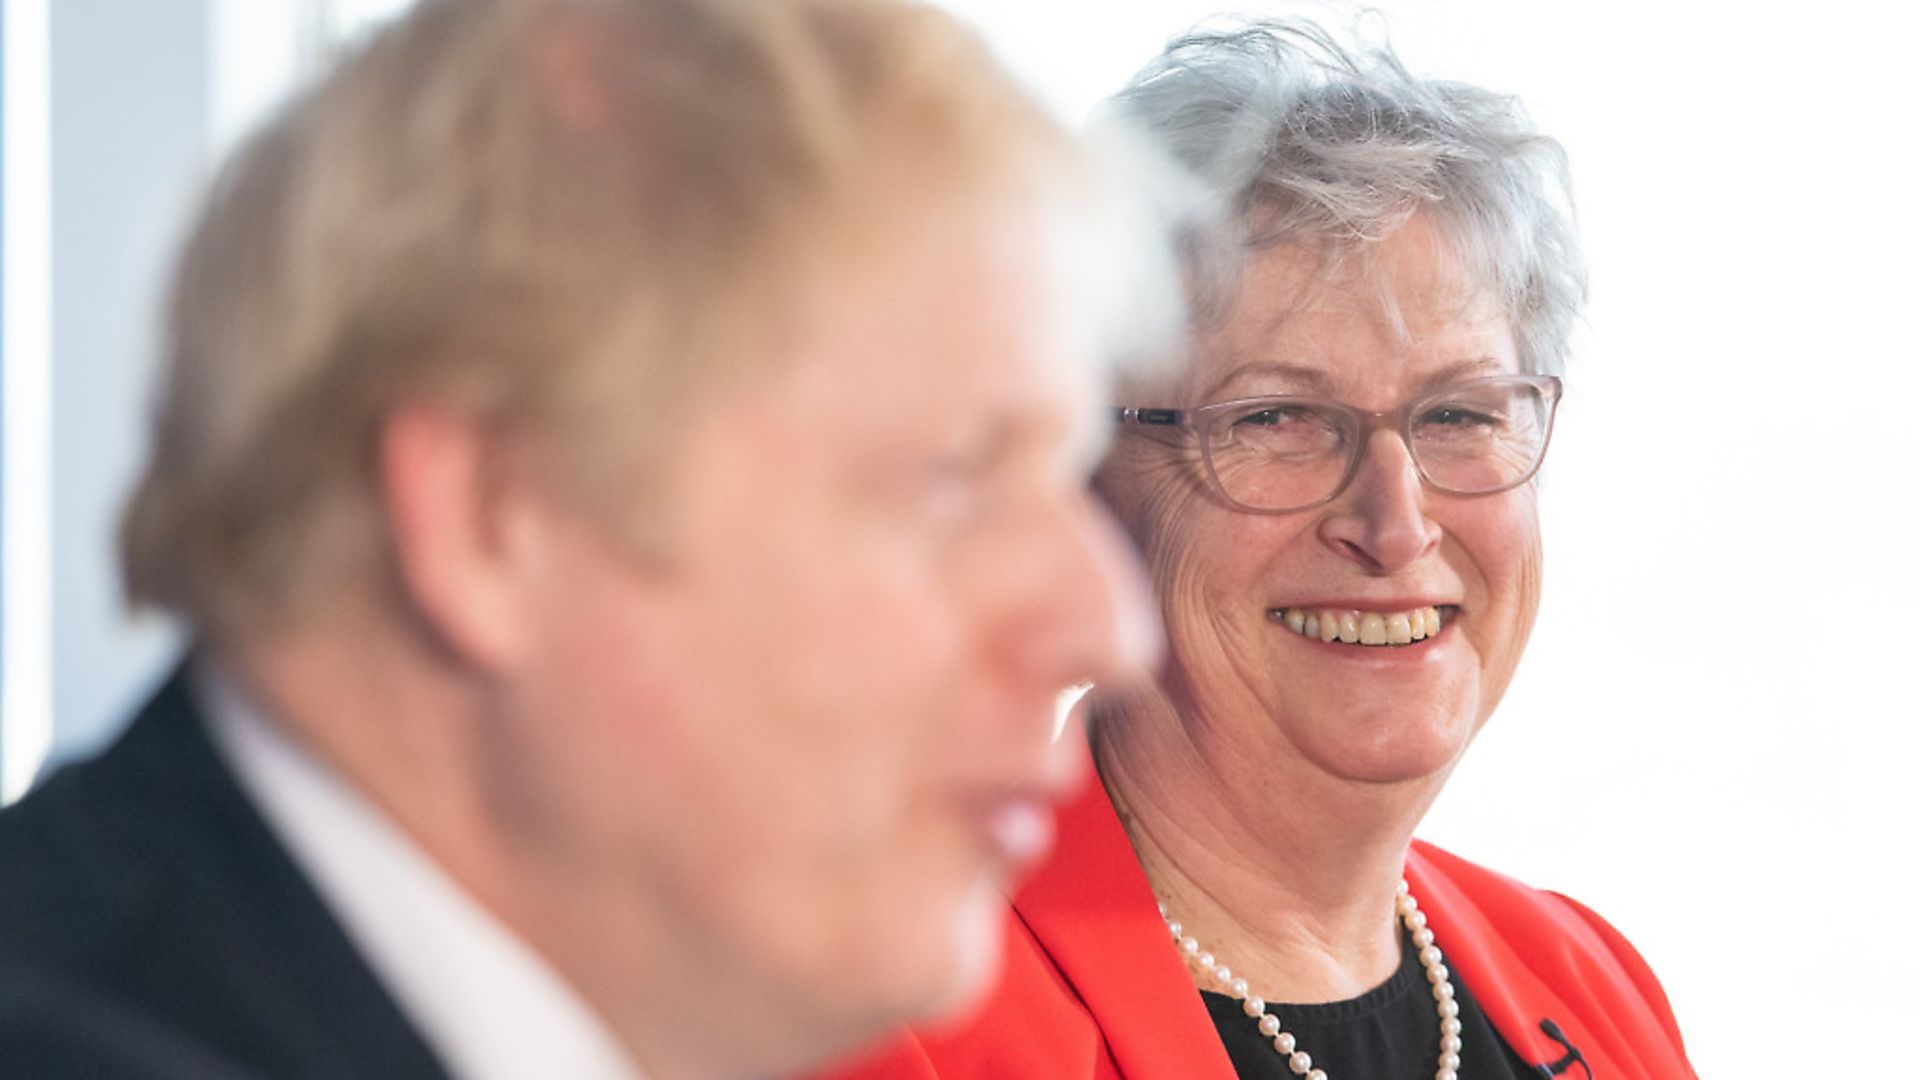 Former Labour MP Gisela Stuart speaking at a press conference in support of Boris Johnson during the general election campaign. Picture: Dominic Lipinski/PA Wire/PA Images - Credit: PA Wire/PA Images